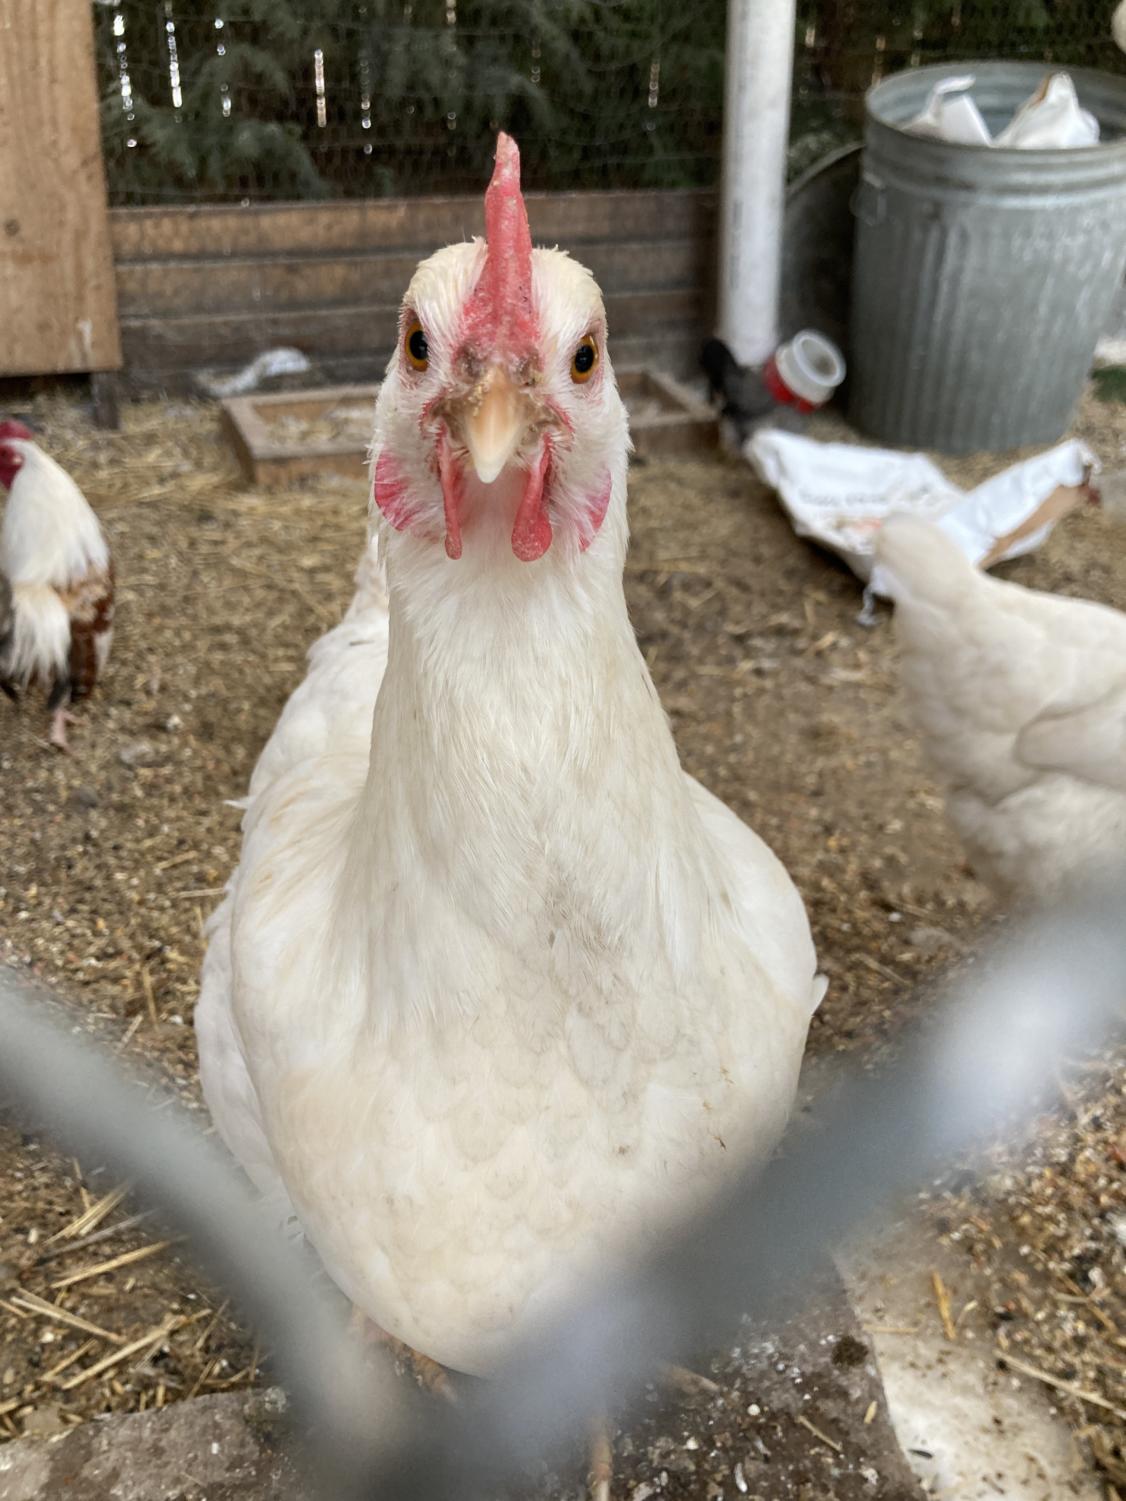 A close-up of a chicken at the Chicago Chicken Rescue.